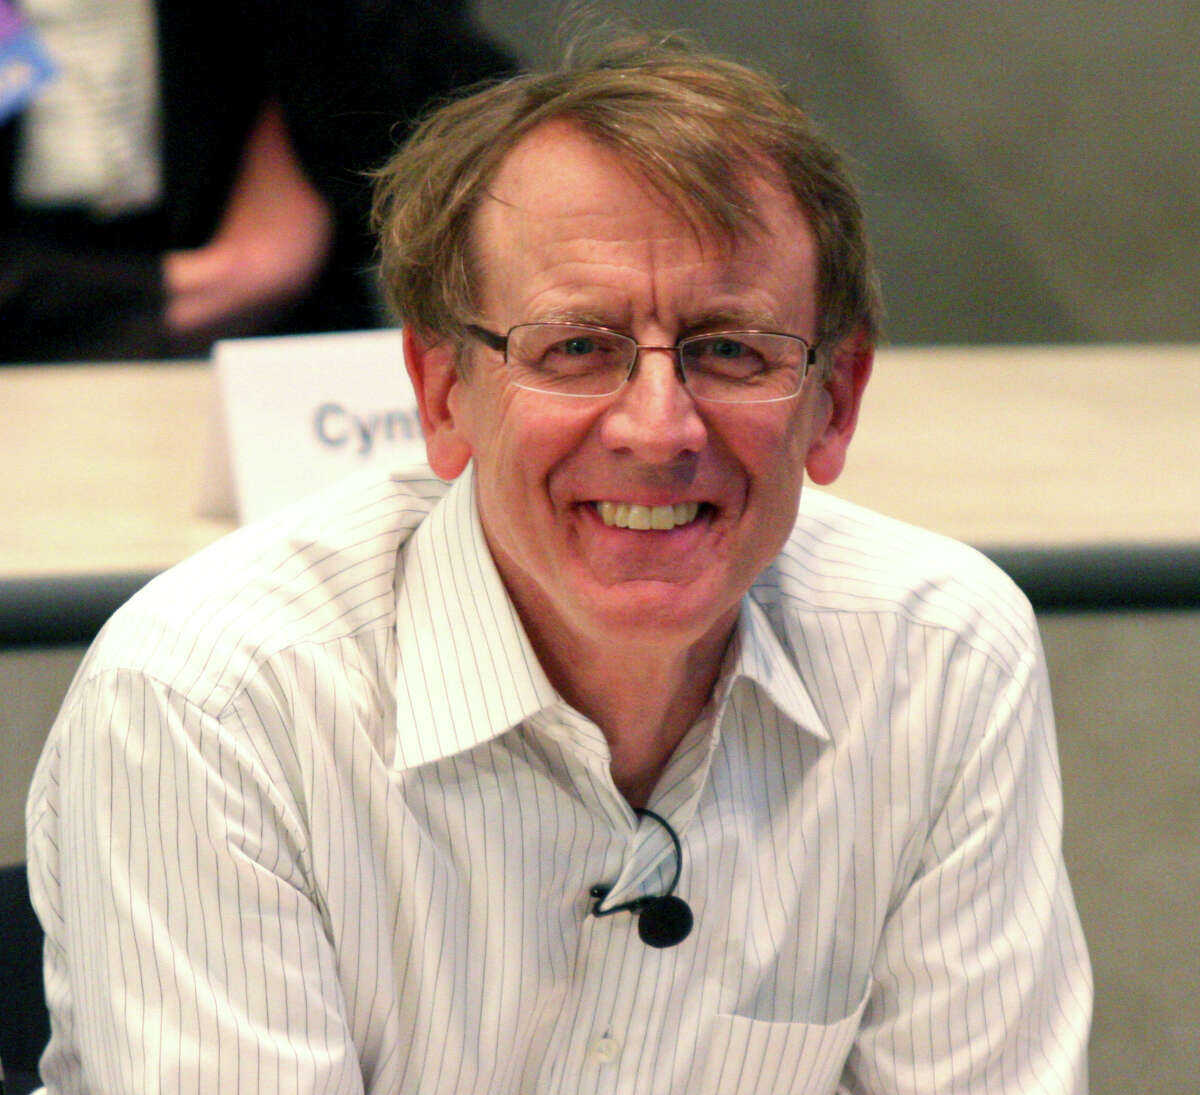 John Doerr, venture capitalist, smiles at the camera before speaking at Rice University on Friday, April 15, 2011, in Houston. Doerr as backed many of America's best entrepreneuers such as Google, Amazon and Intuit. These ventures have created more than 150,000 new jobs. (Tonya Torres / Houston Chronicle)